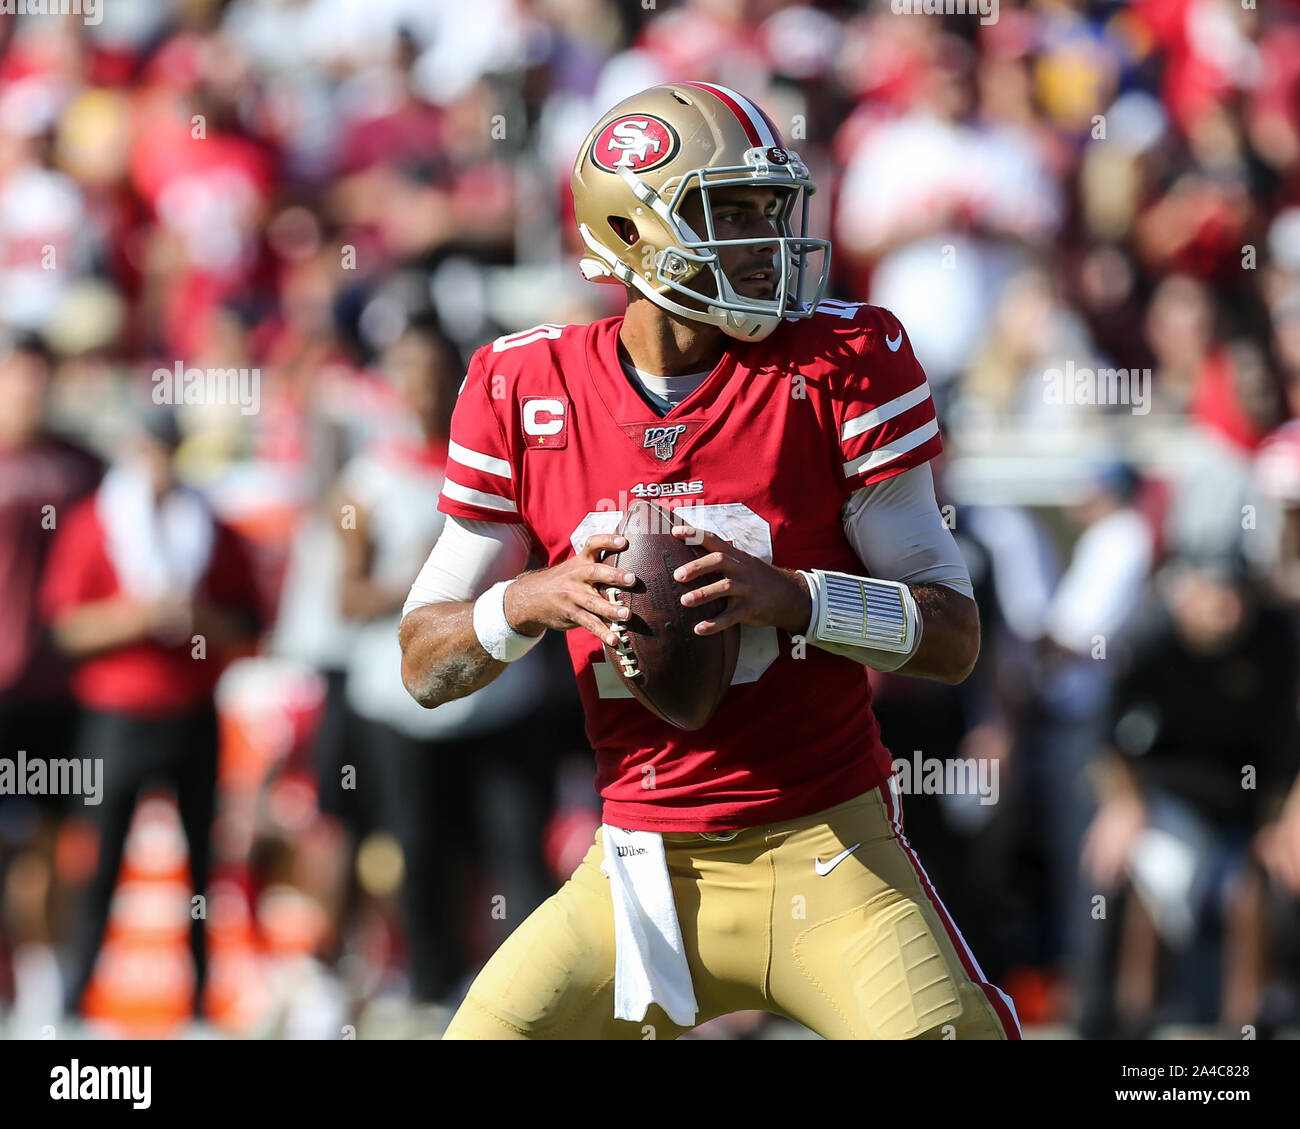 Los Angeles, CA. 13th Oct, 2019. San Francisco 49ers quarterback Jimmy  Garoppolo #10 after the NFL game between San Francisco 49ers vs Los Angeles  Rams at the Los Angeles Memorial Coliseum in